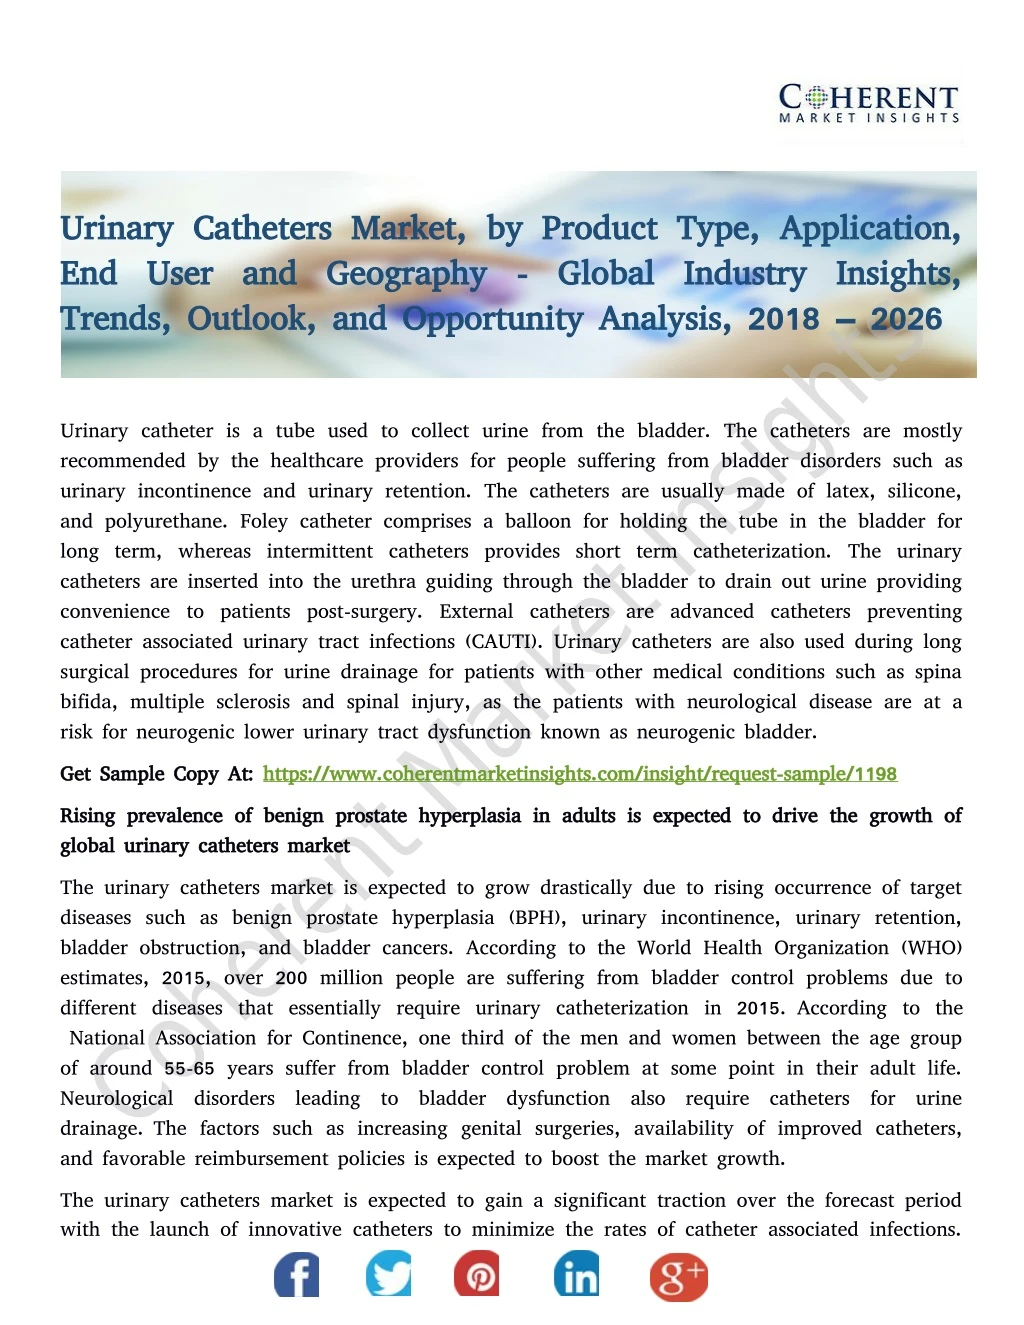 urinary catheters market by product type